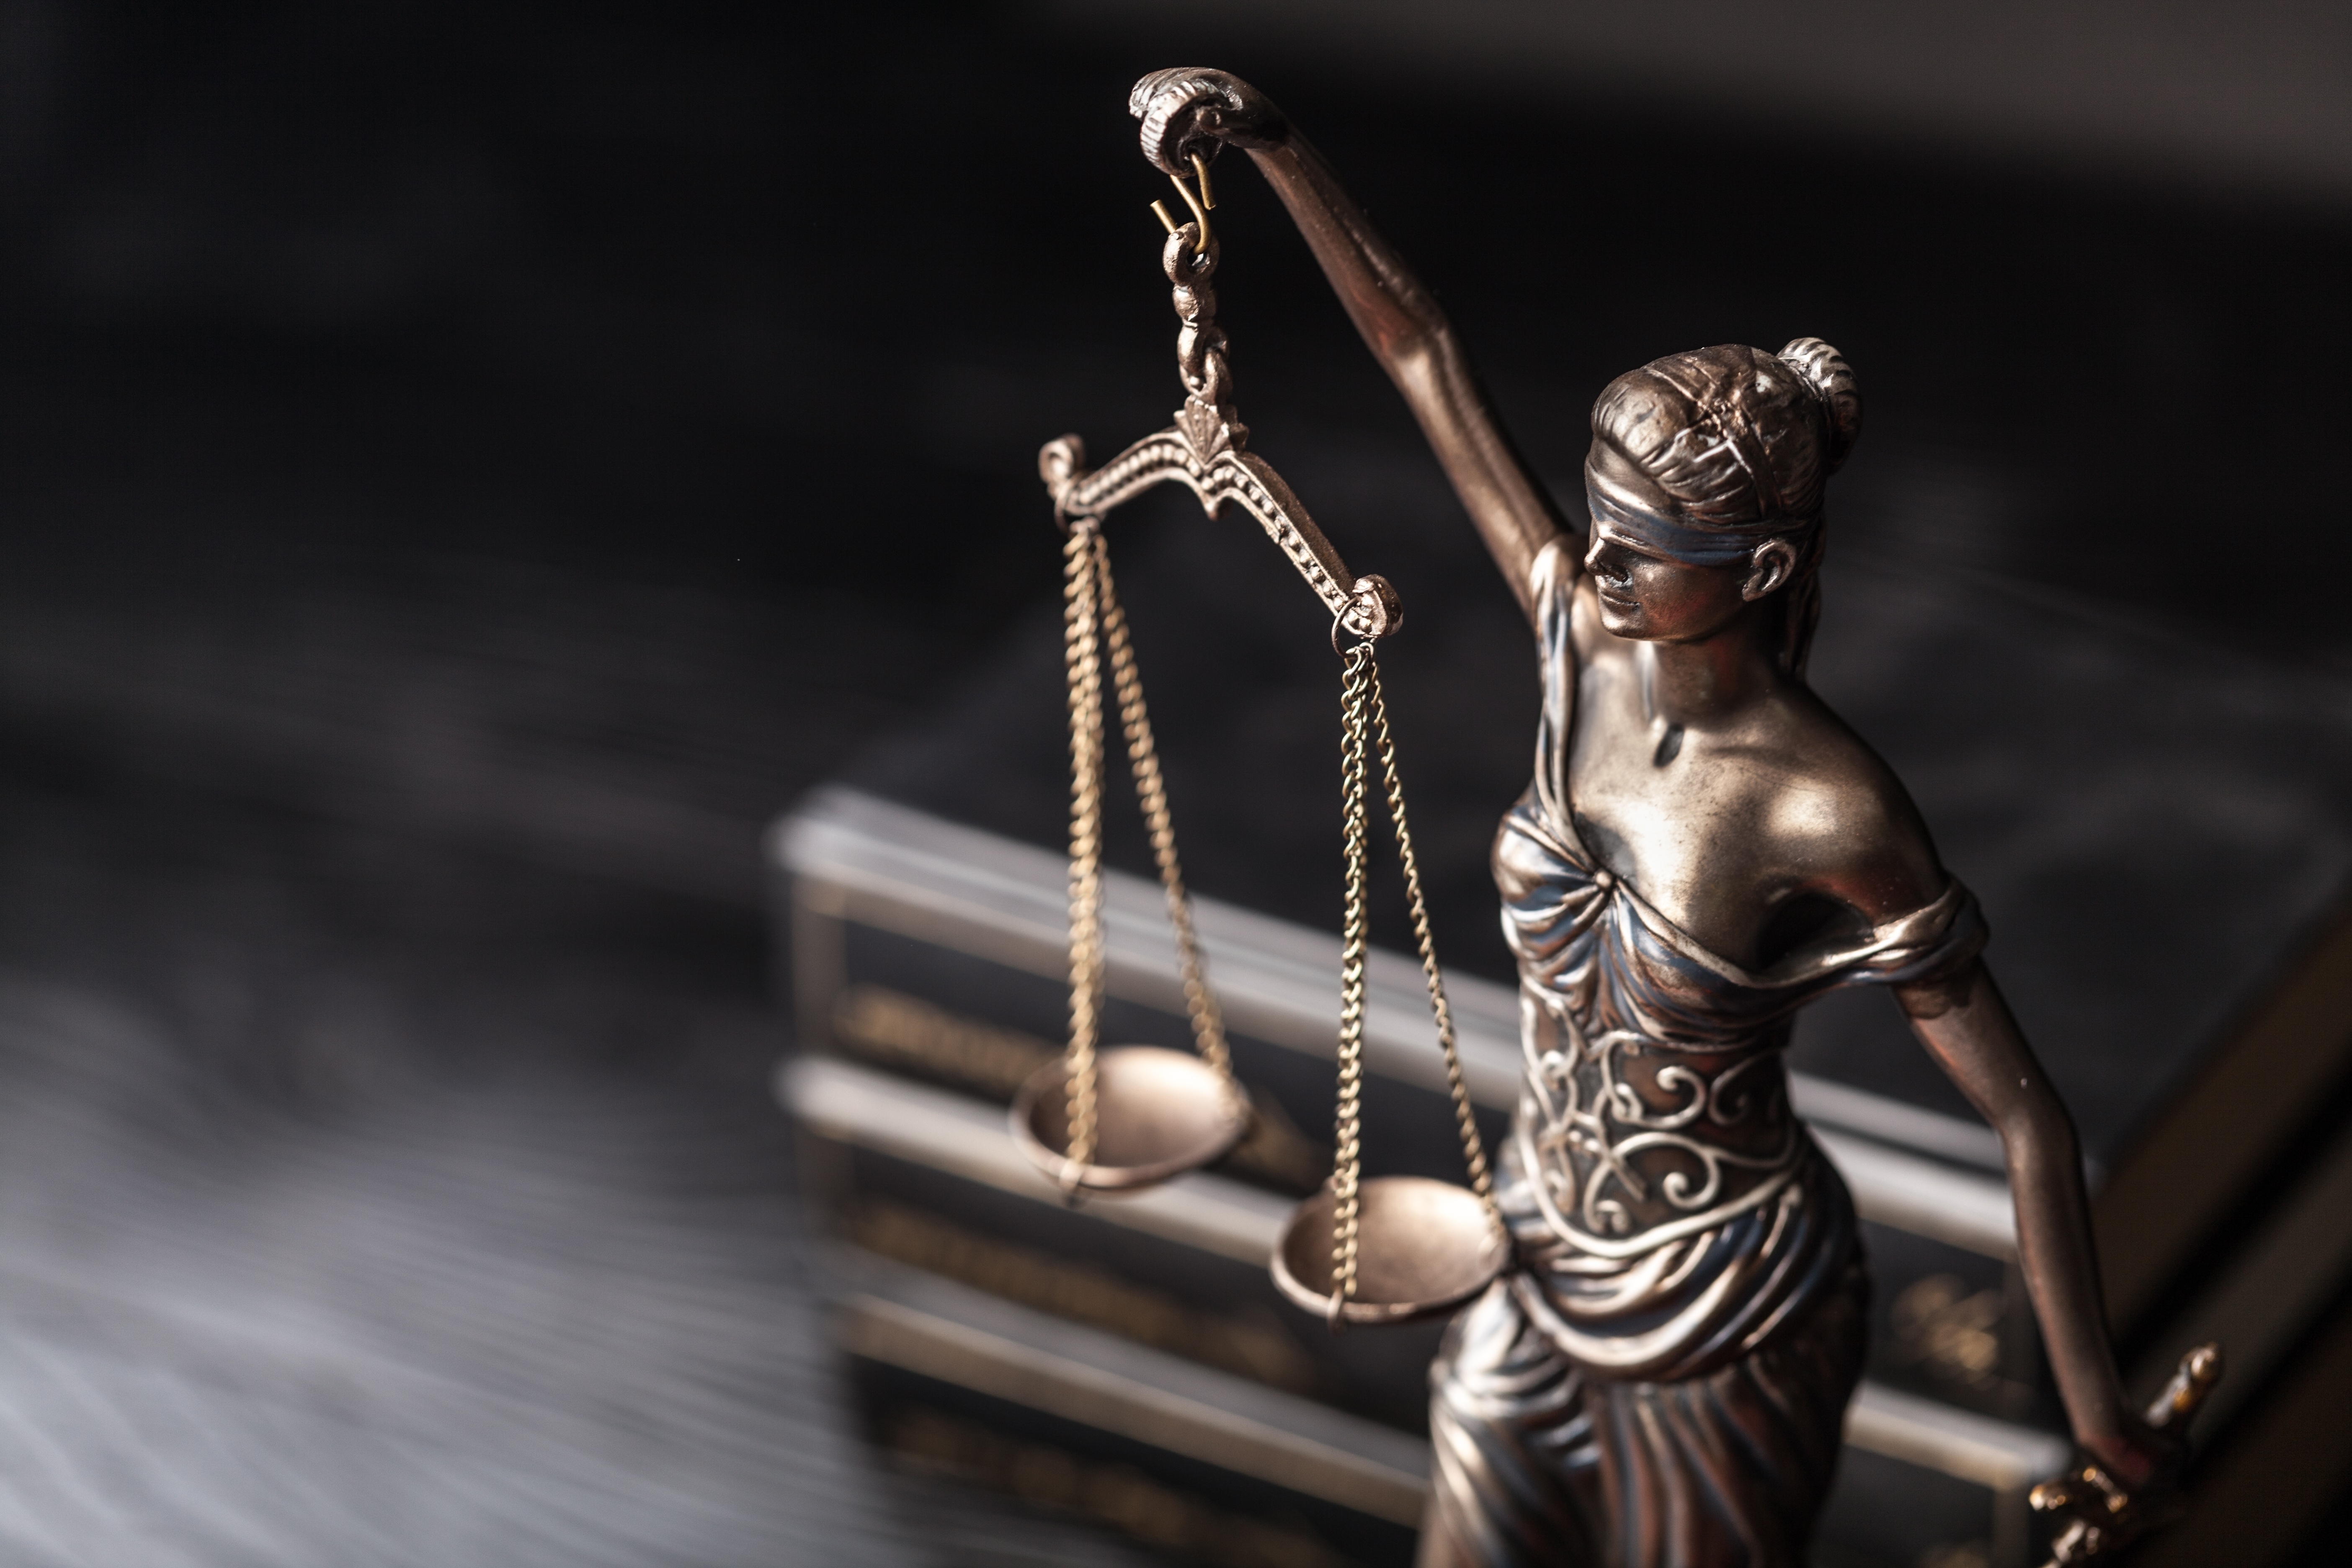 Increasing Equity in the Legal System